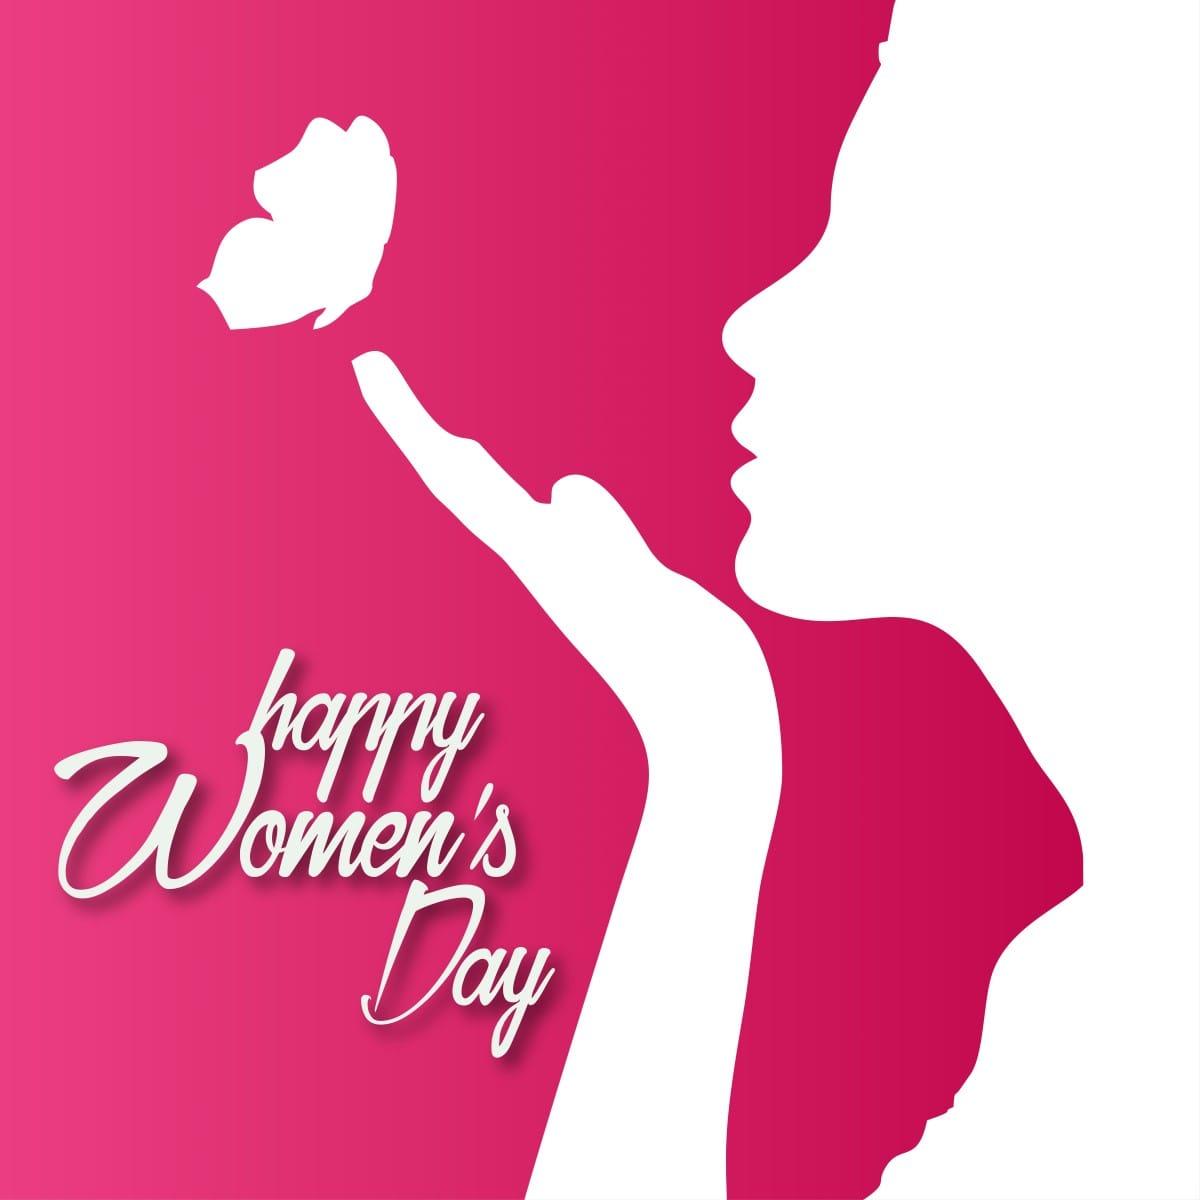 Happy Women's Day 2017 Image Wallpaper Picture. Newlife